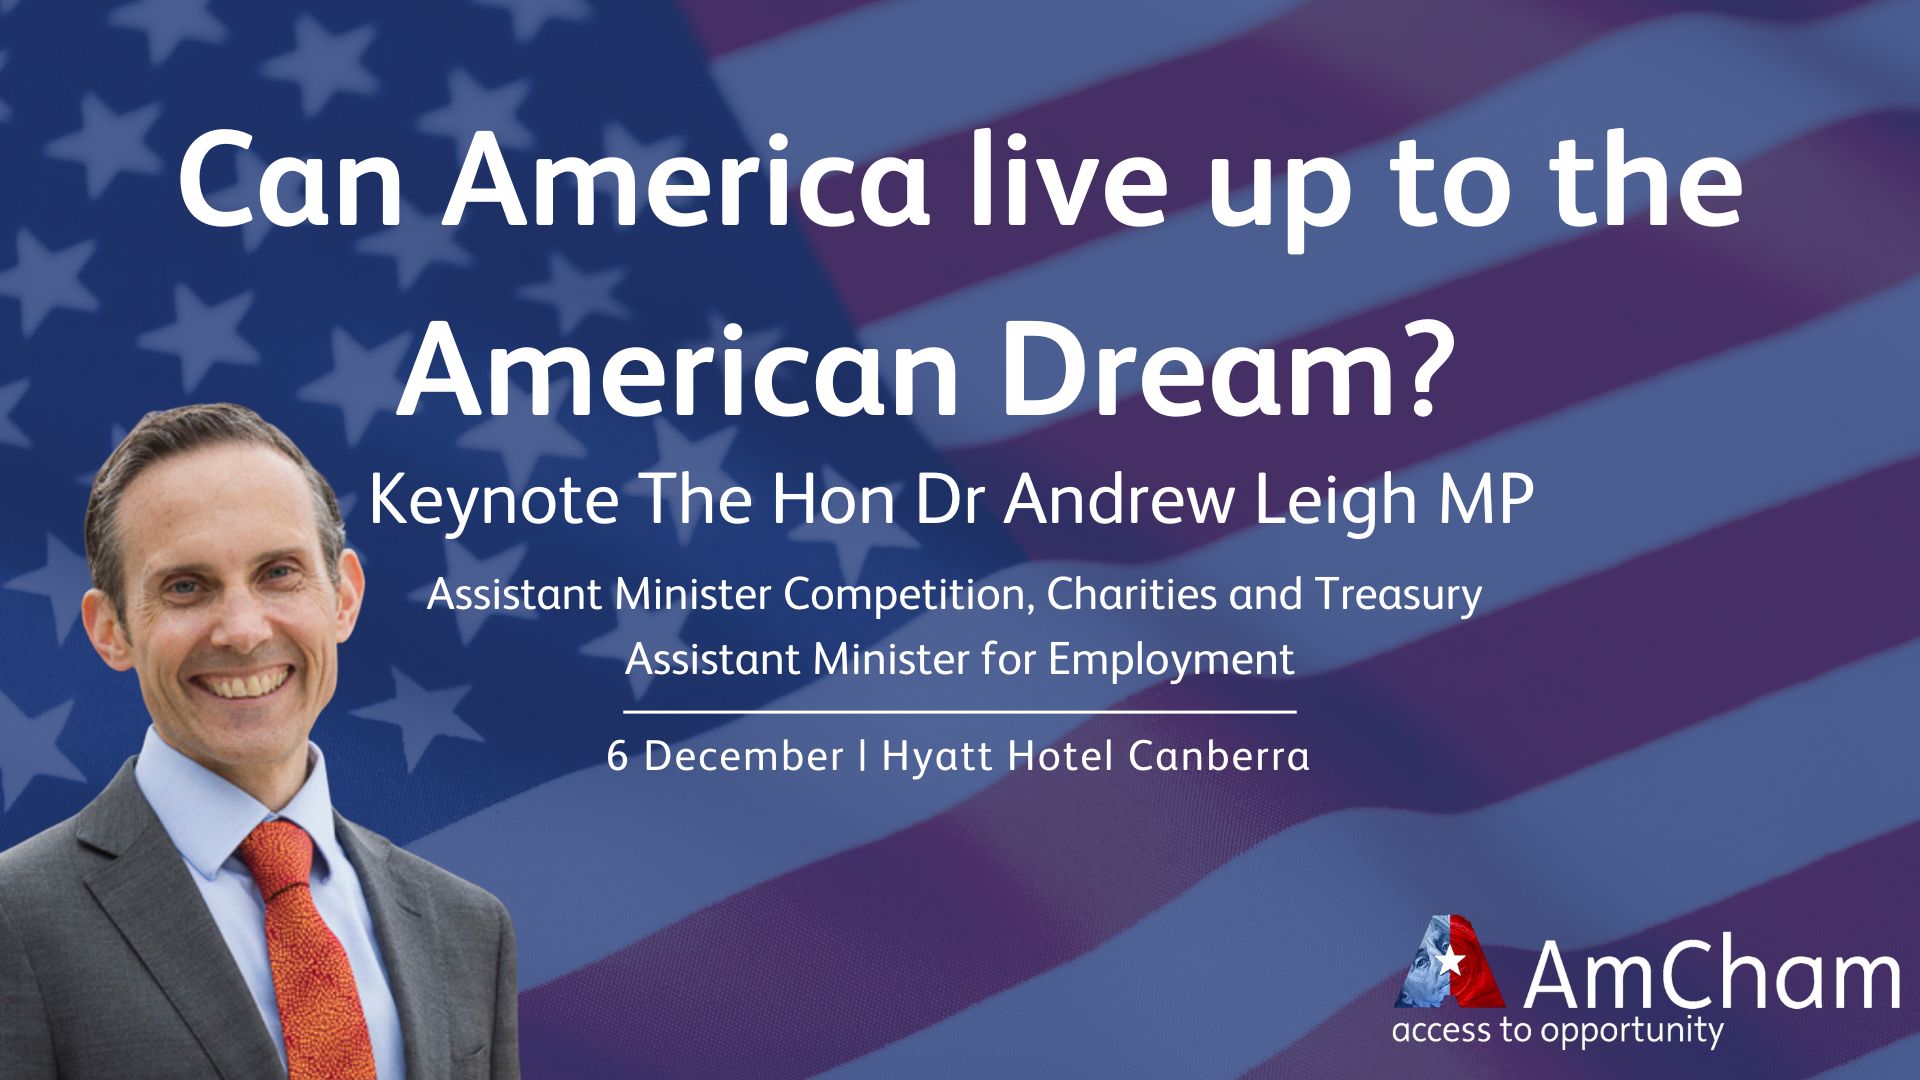 Can America live up to the American Dream?